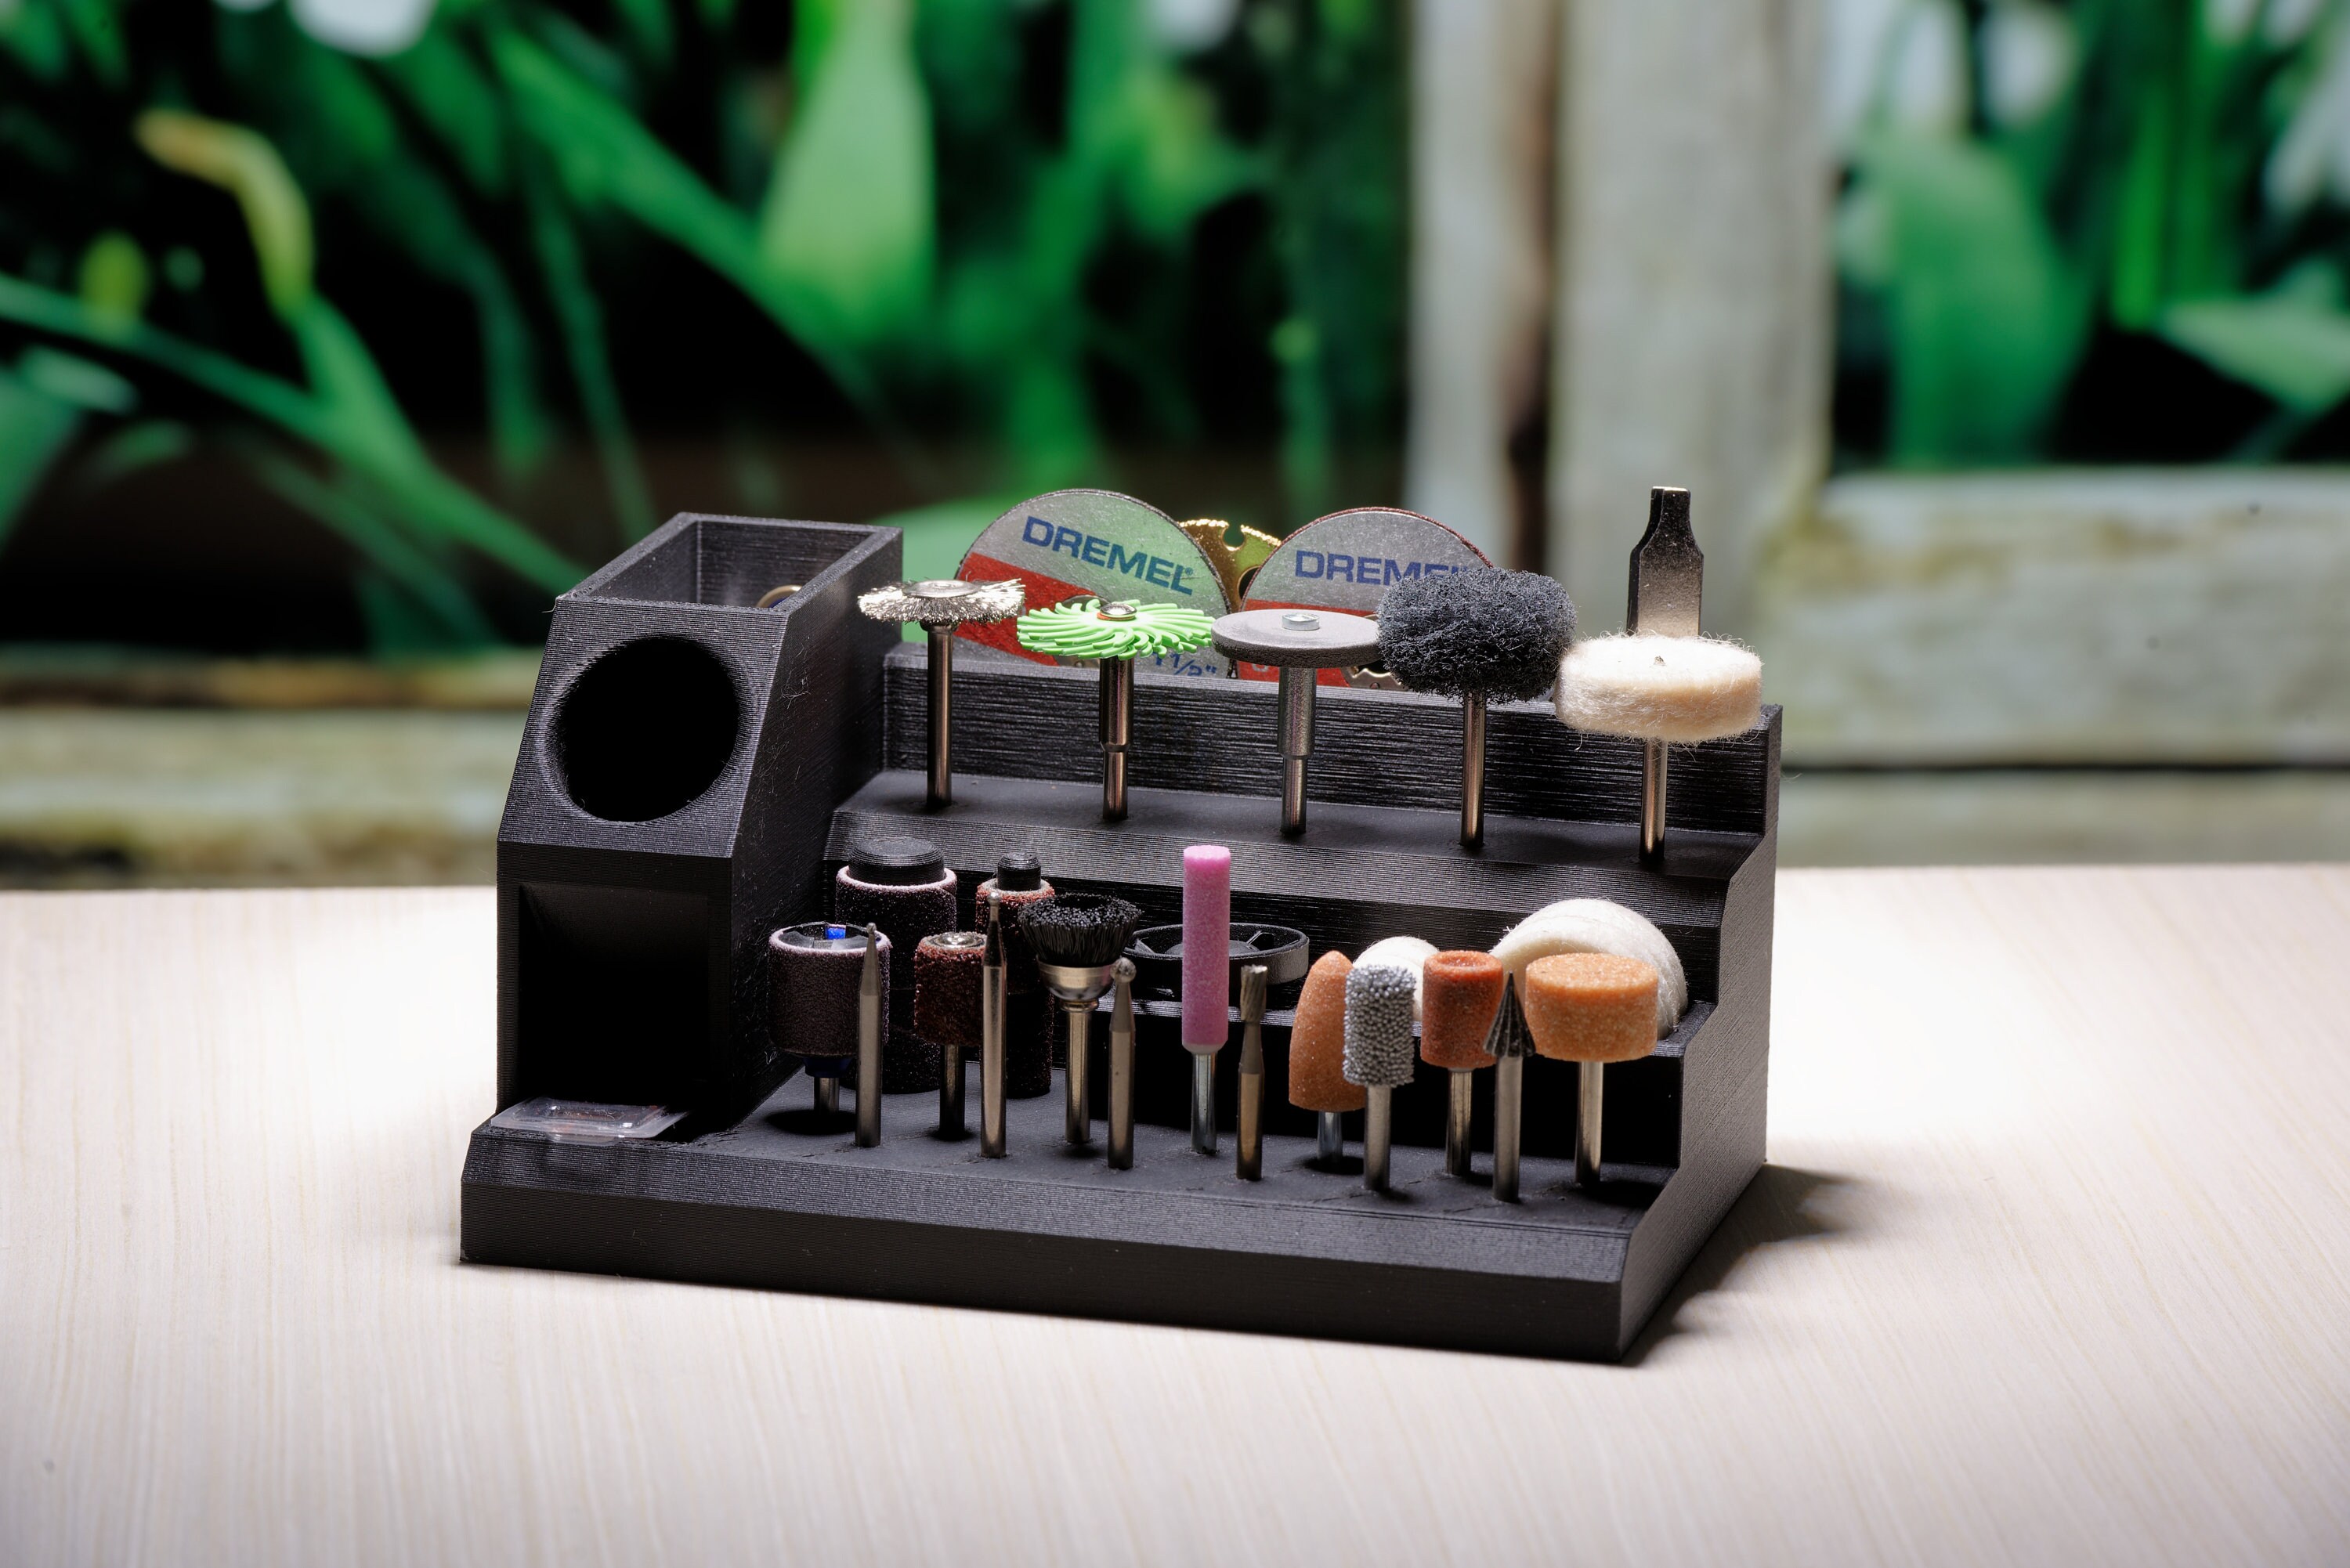 NEW Dremel Stylo Work Assistant Tool Holder crafting, Model Making, Glass  Etching, Polishing, Jewelery Making, and More 